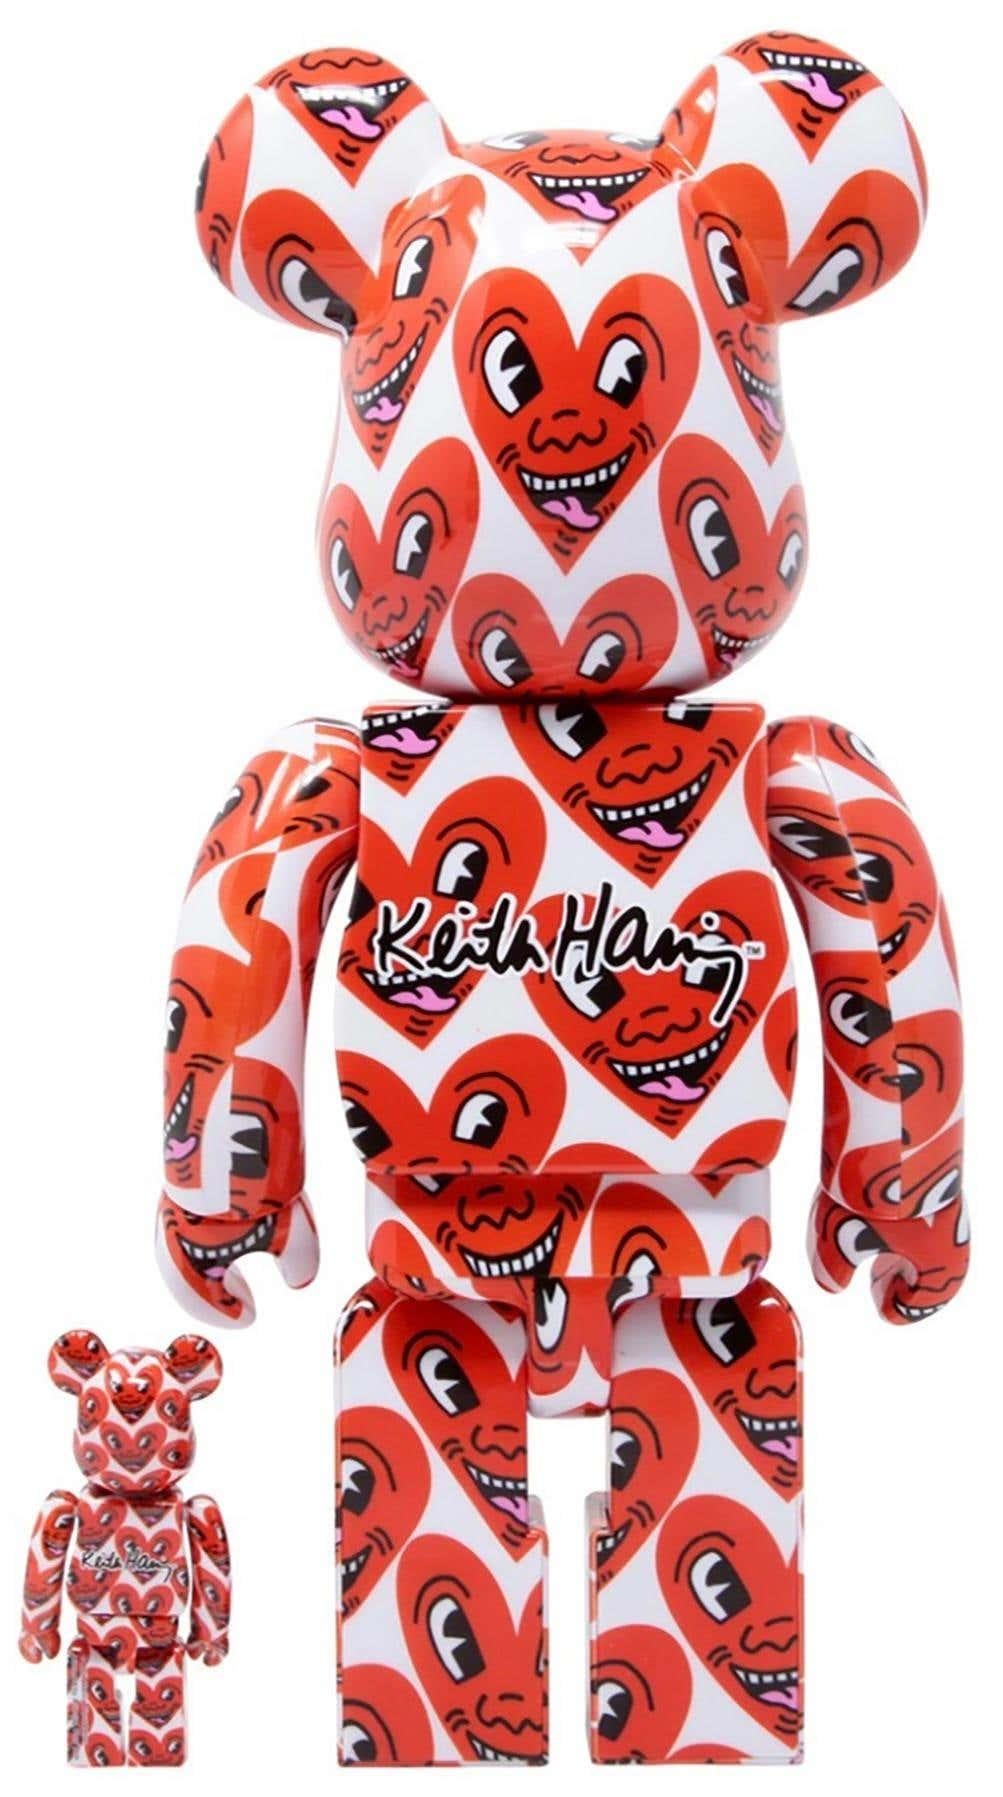 Keith Haring Bearbrick 400% set of 4 works (Haring BE@RBRICK) For Sale 3